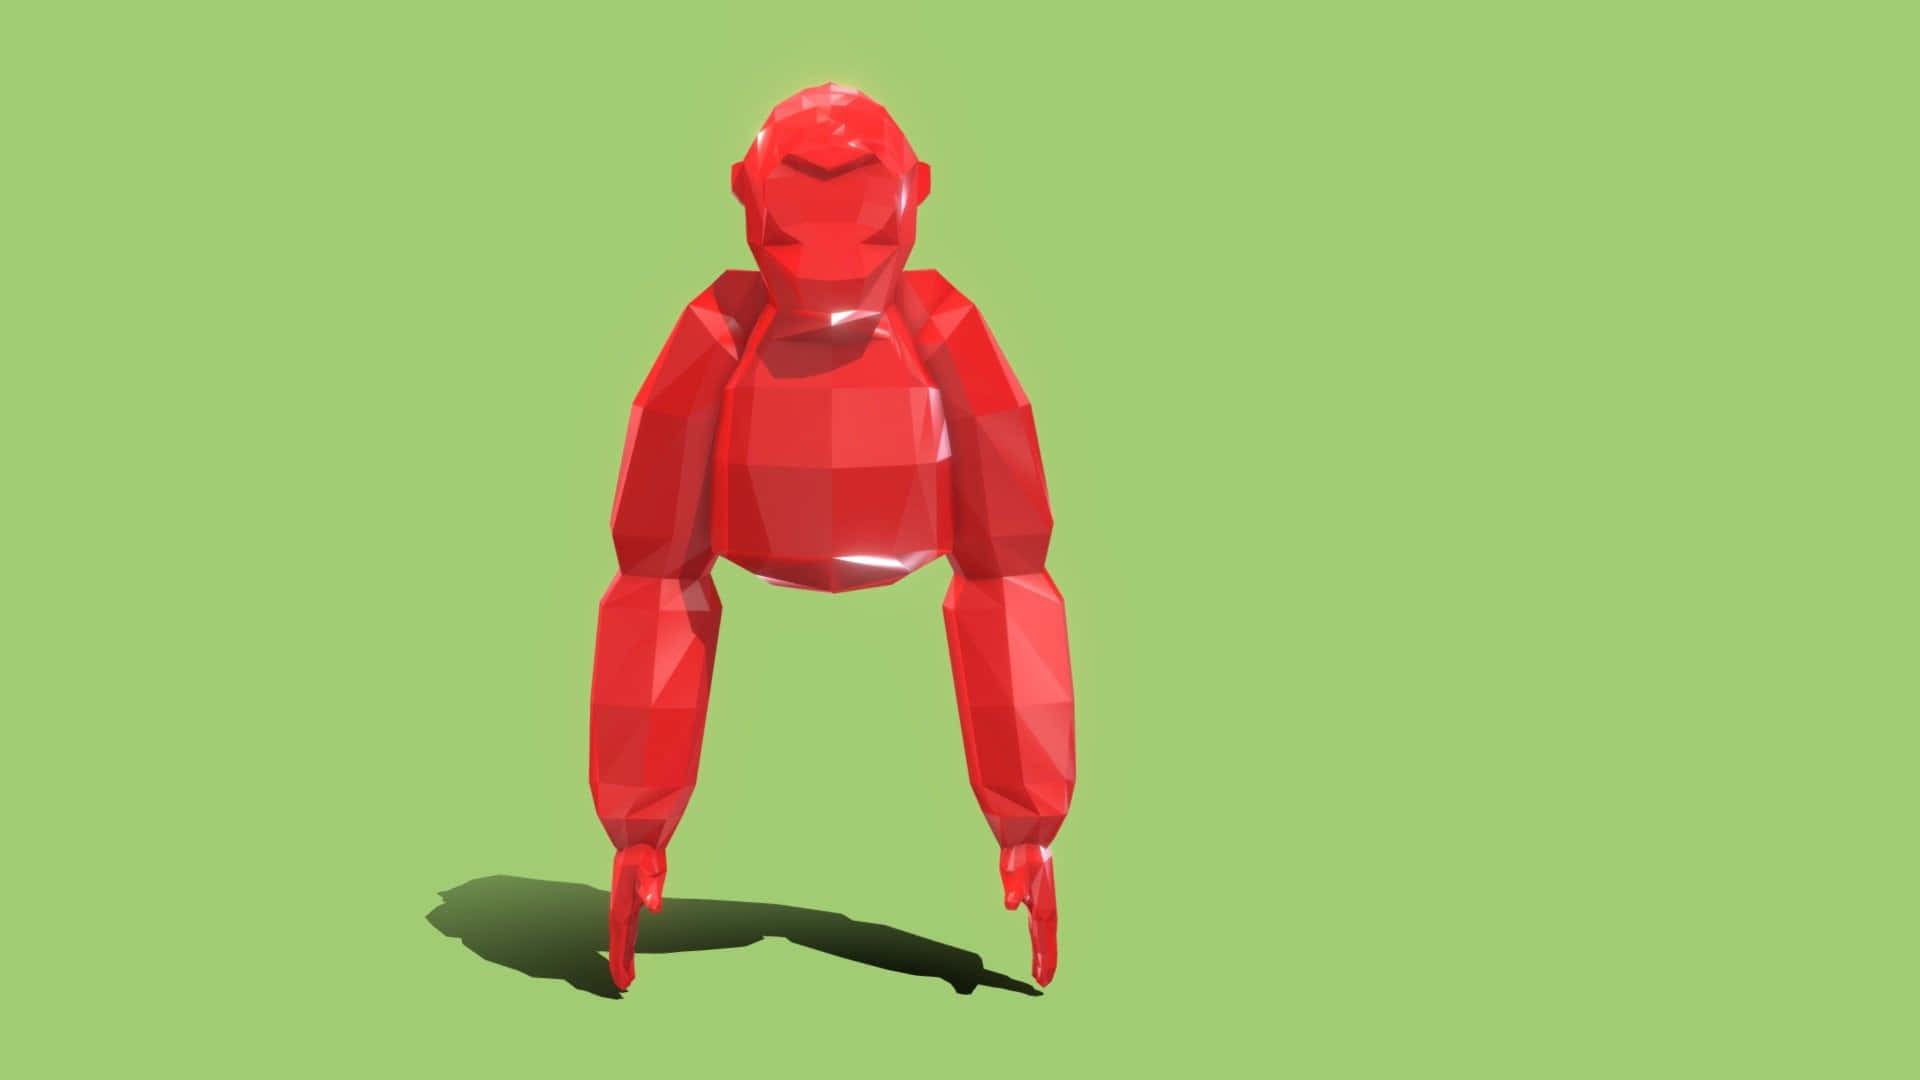 A Red Polygonal Robot Standing On A Green Background